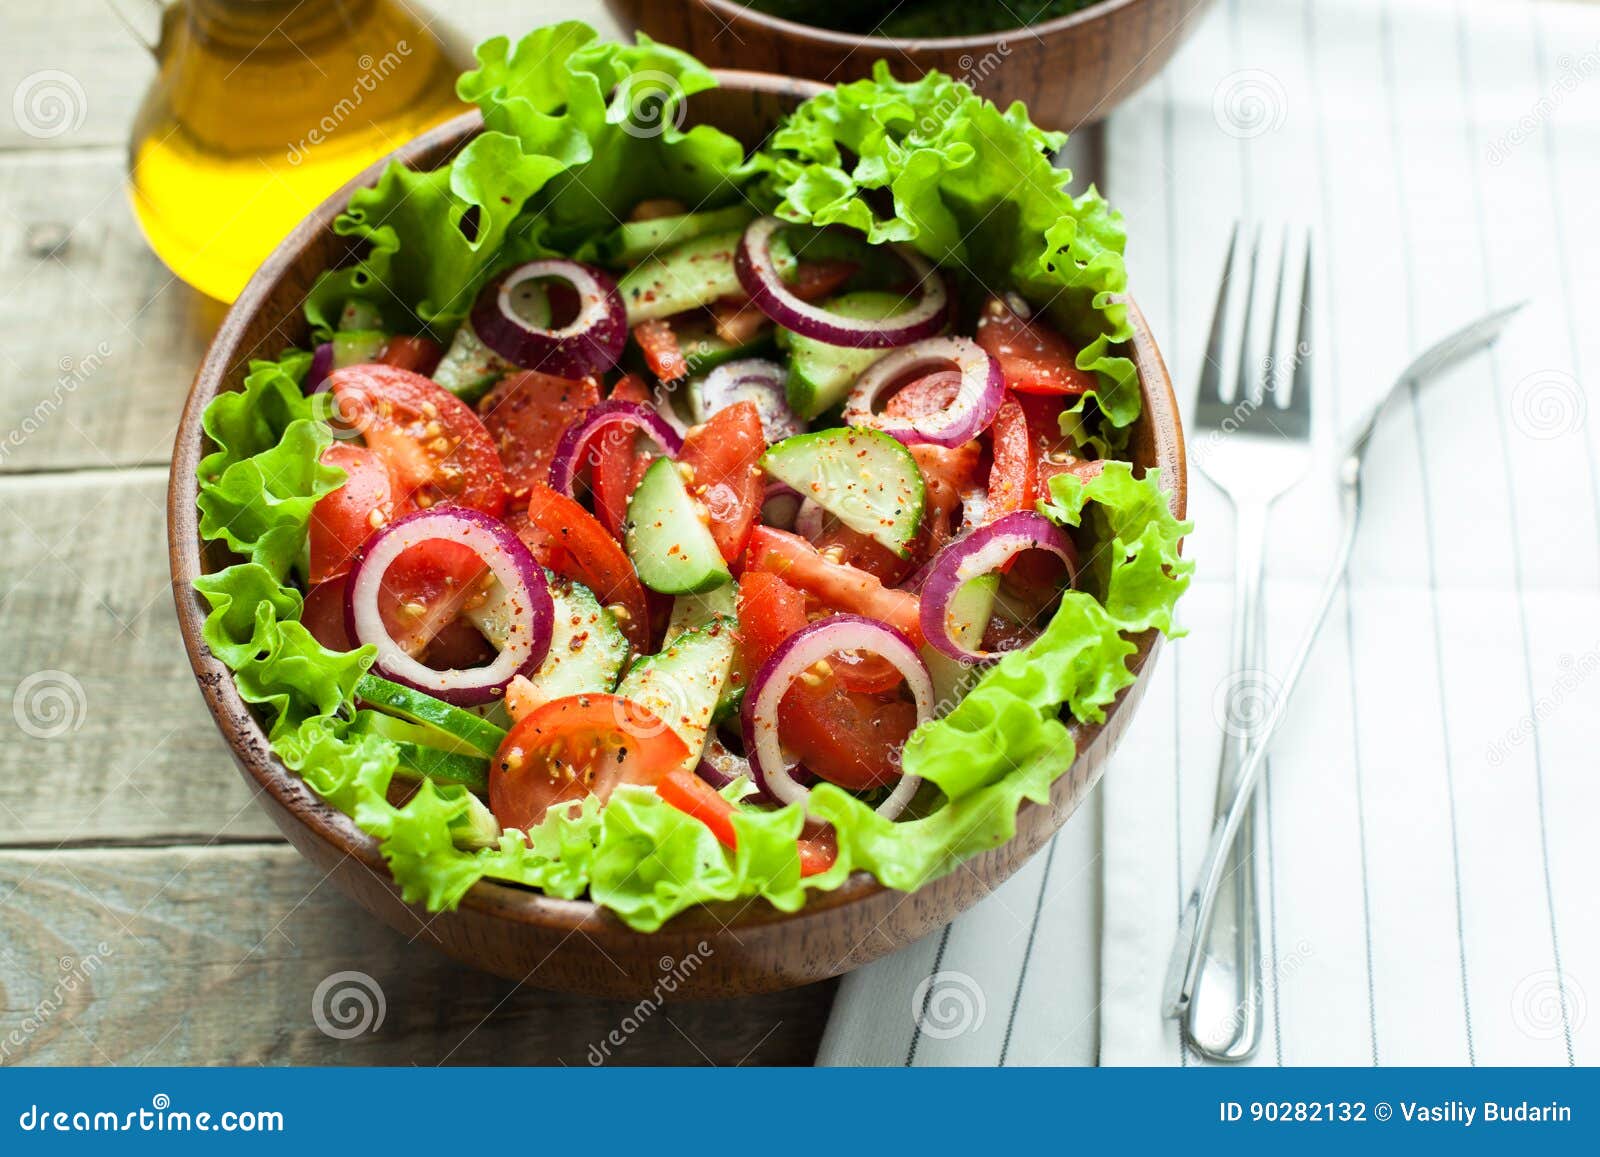 Rustic Salad of Fresh Tomatoes, Cucumbers, Red Onions and Lettuce ...